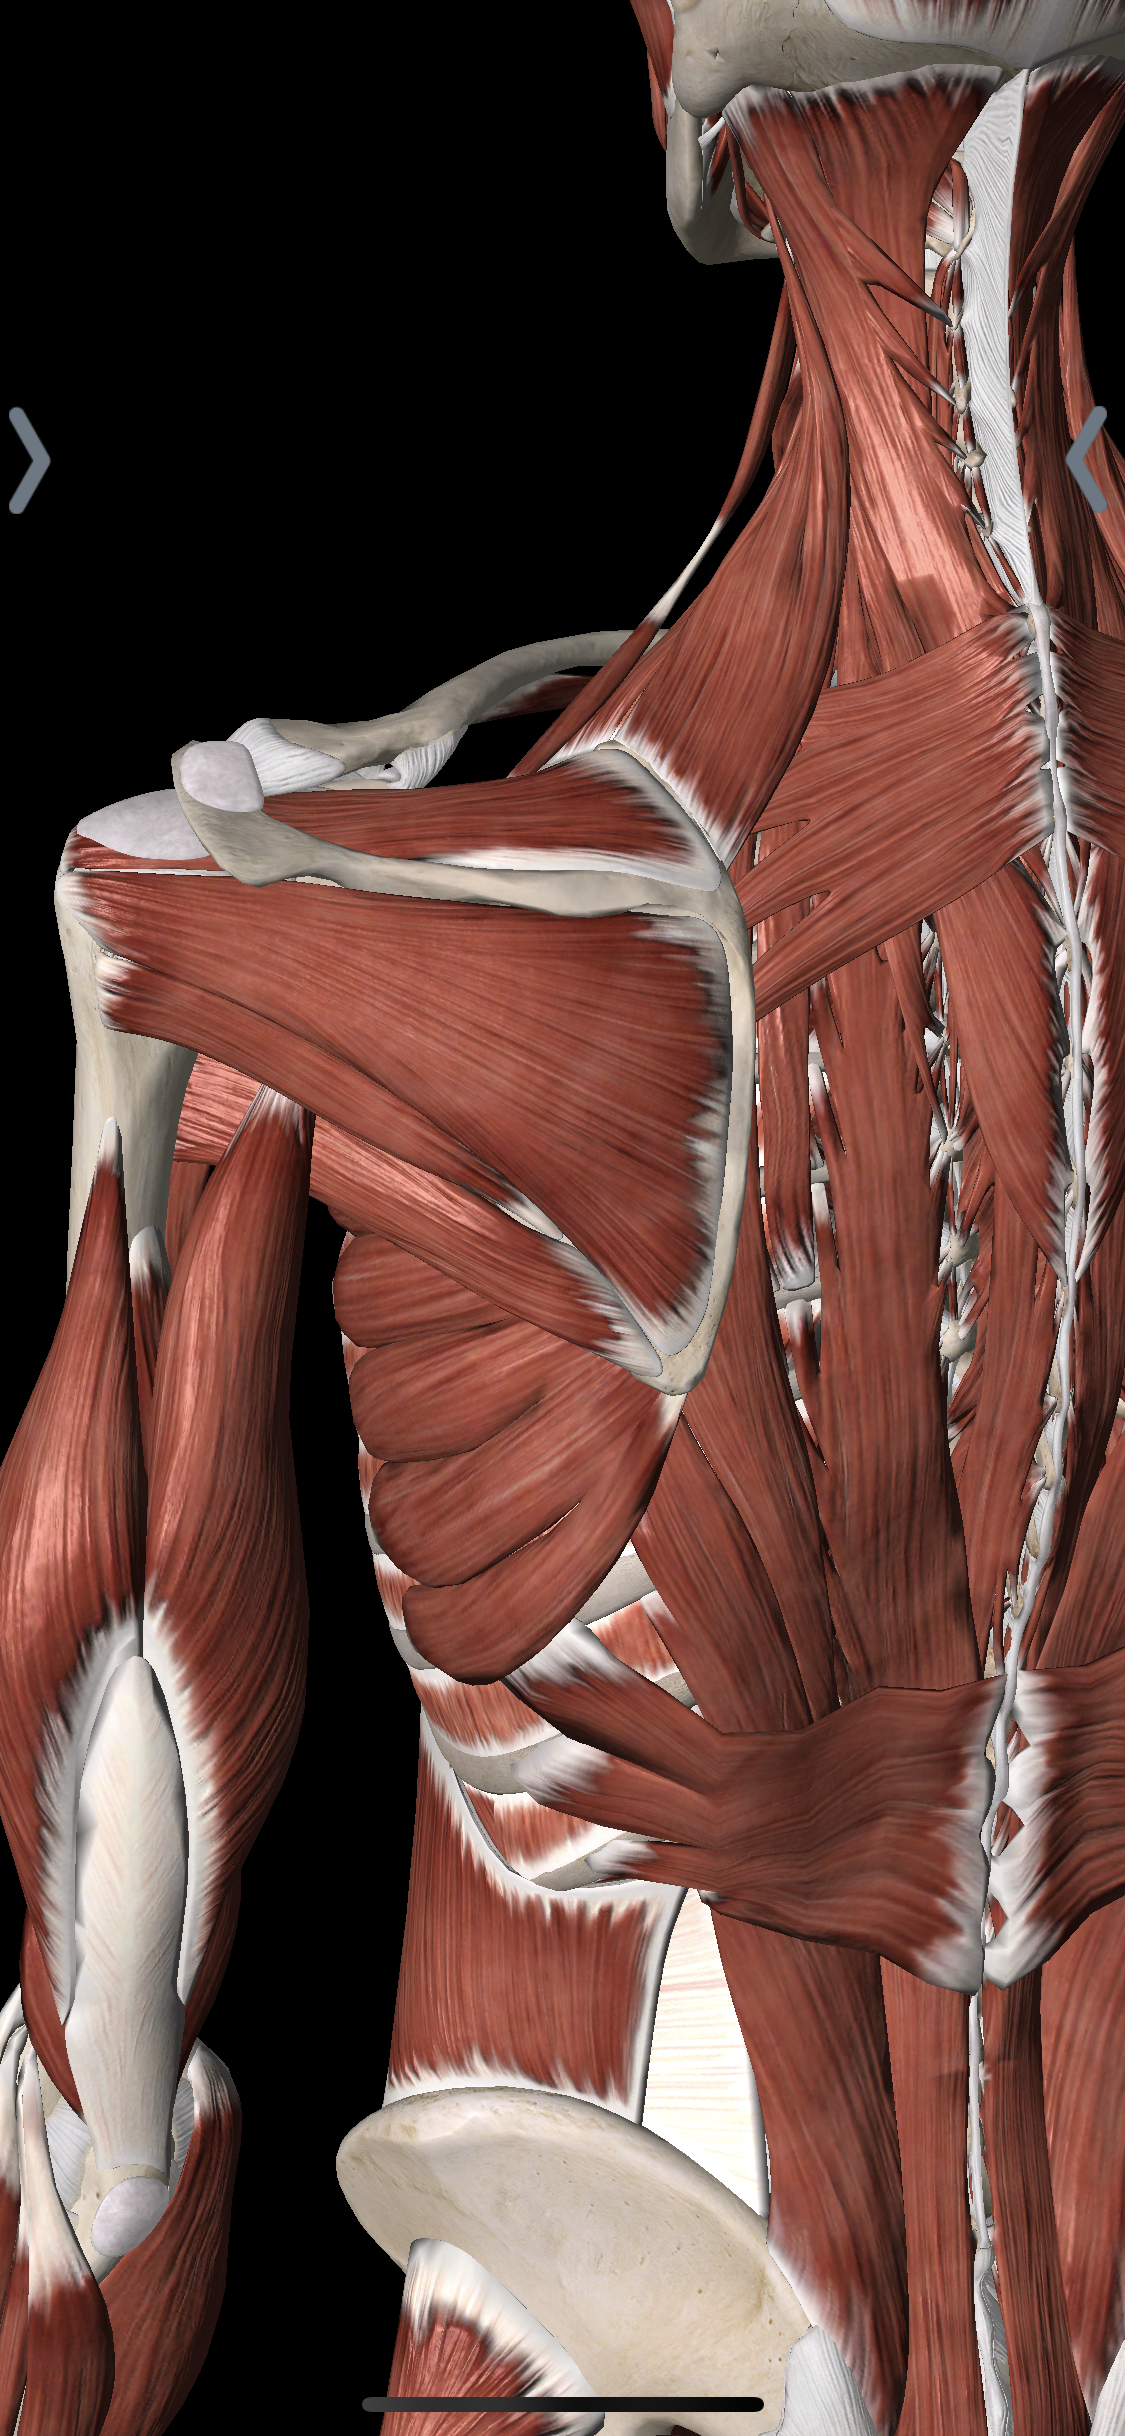 A back view of the rotator cuff